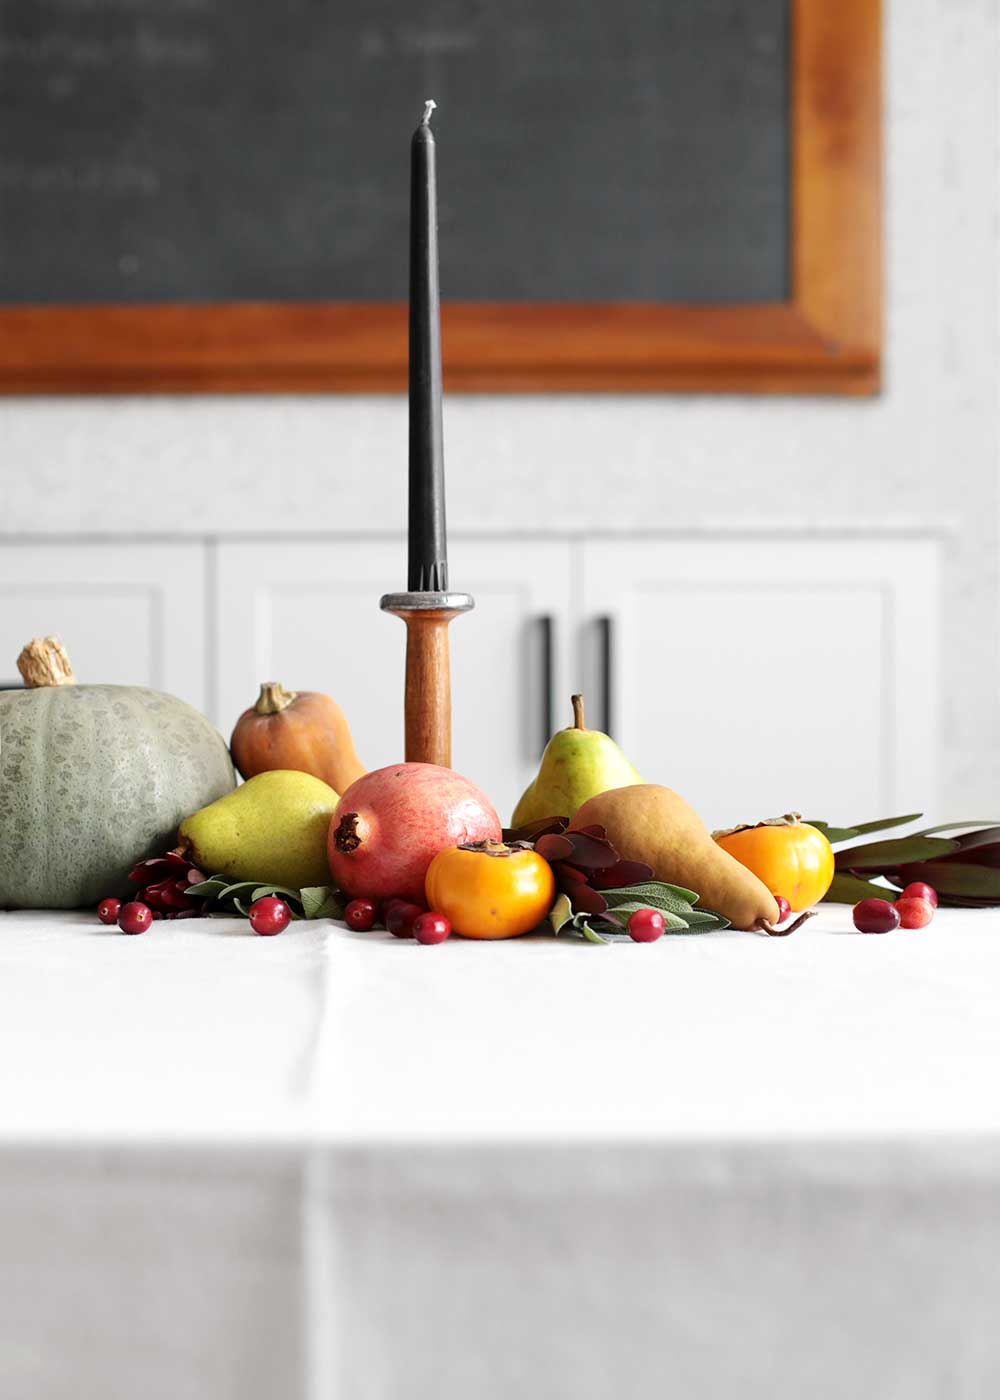 Thanksgiving table decor ideas - use fruit to decorate the dinner table!